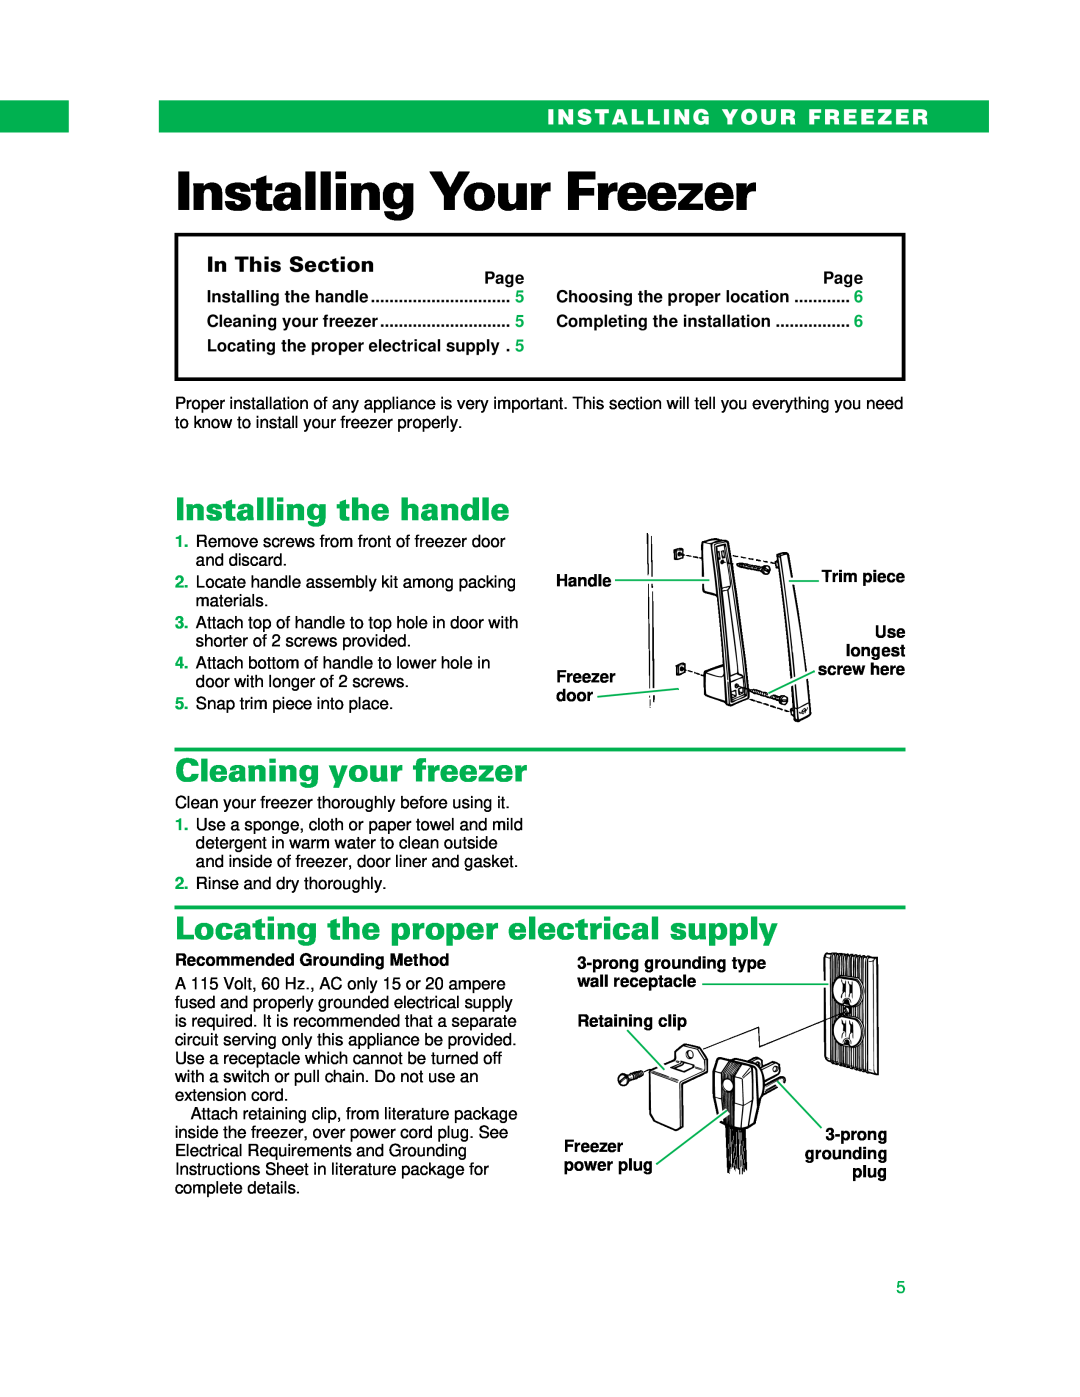 Whirlpool UPRIGHT FREEZER Installing Your Freezer, Installing the handle, Cleaning your freezer, In This Section, Handle 